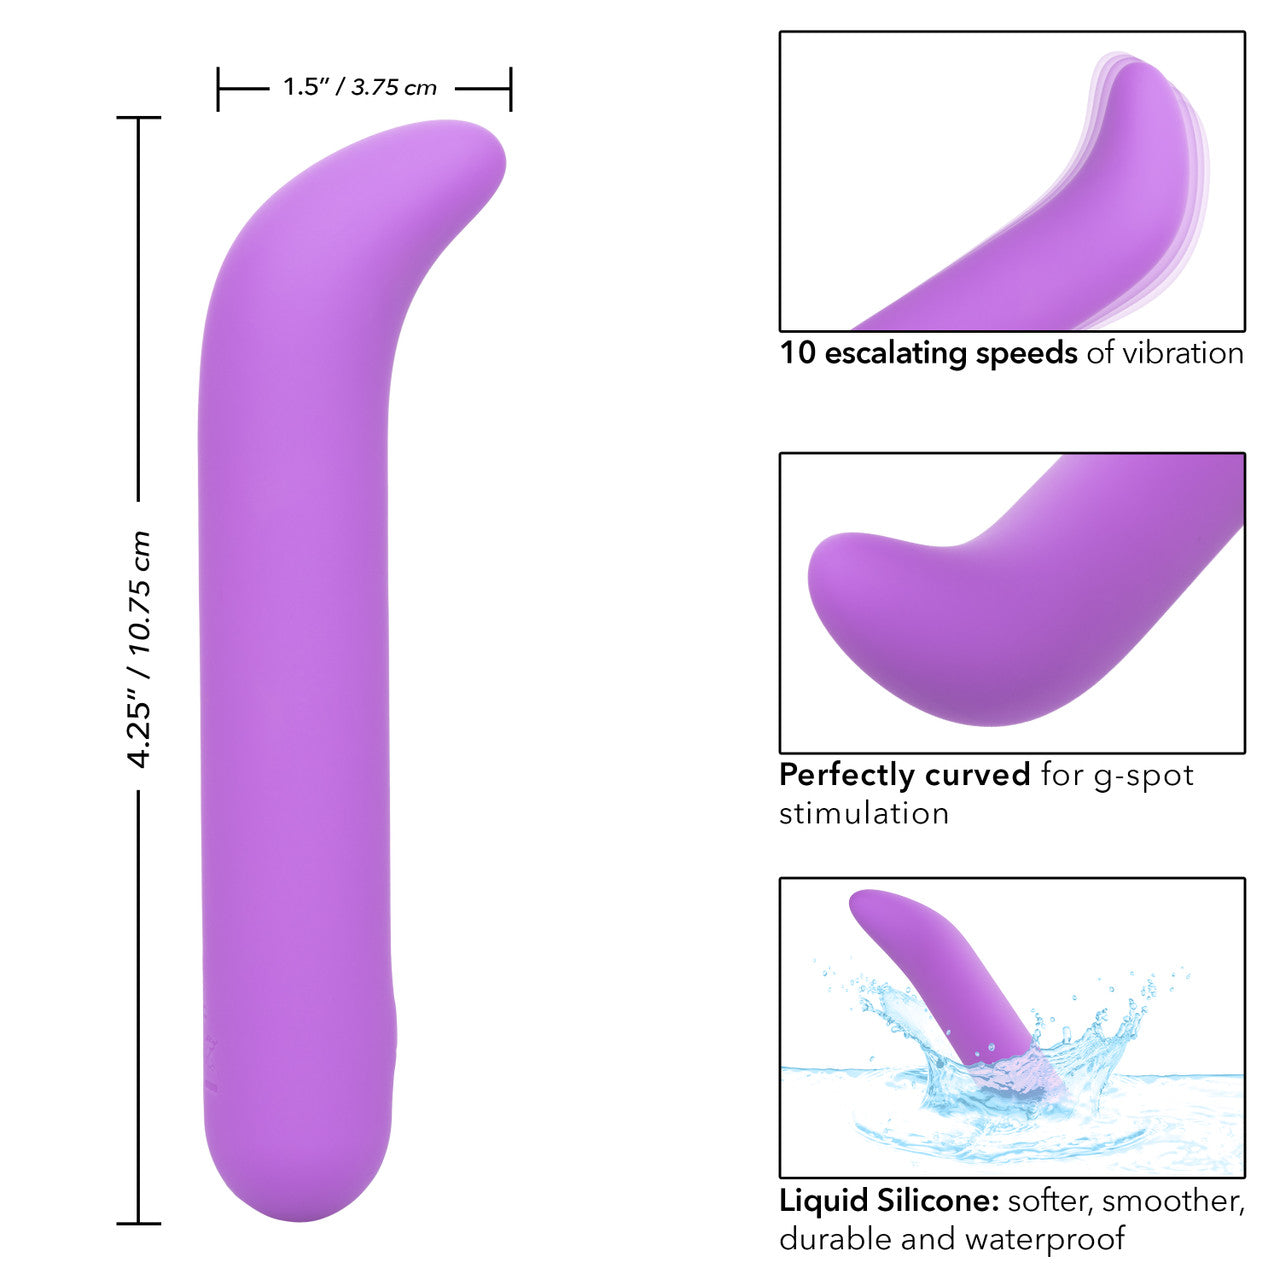 Bliss Liquid Silicone Mini G Vibe - Thorn & Feather Sex Toy Canada